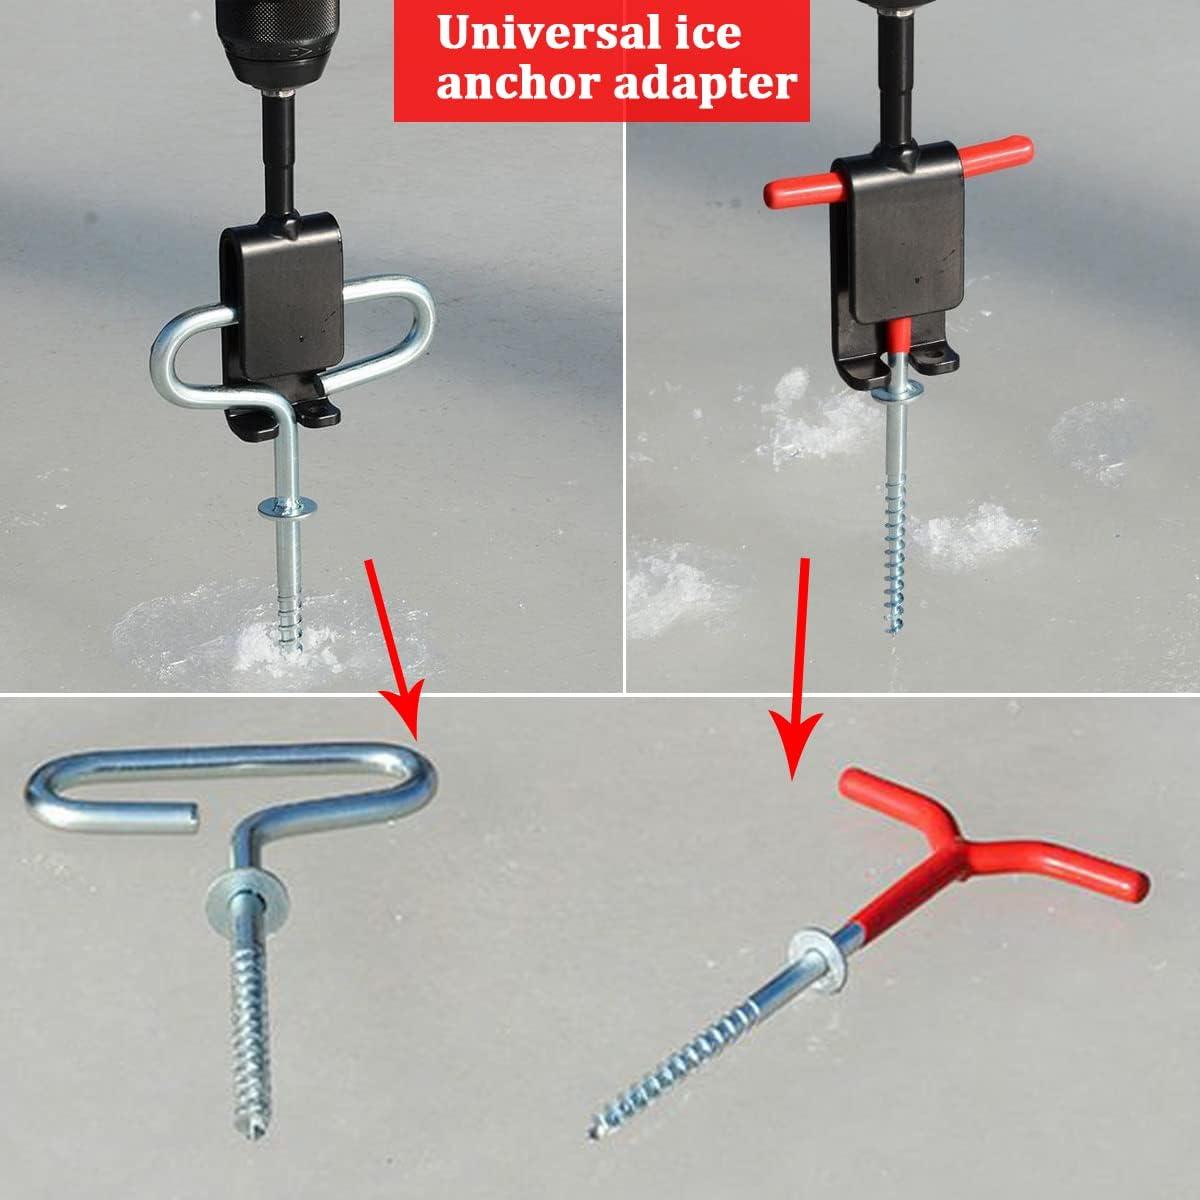 Universal Ice Anchor Power Drill Adapter For Ice Fishing, Make Set